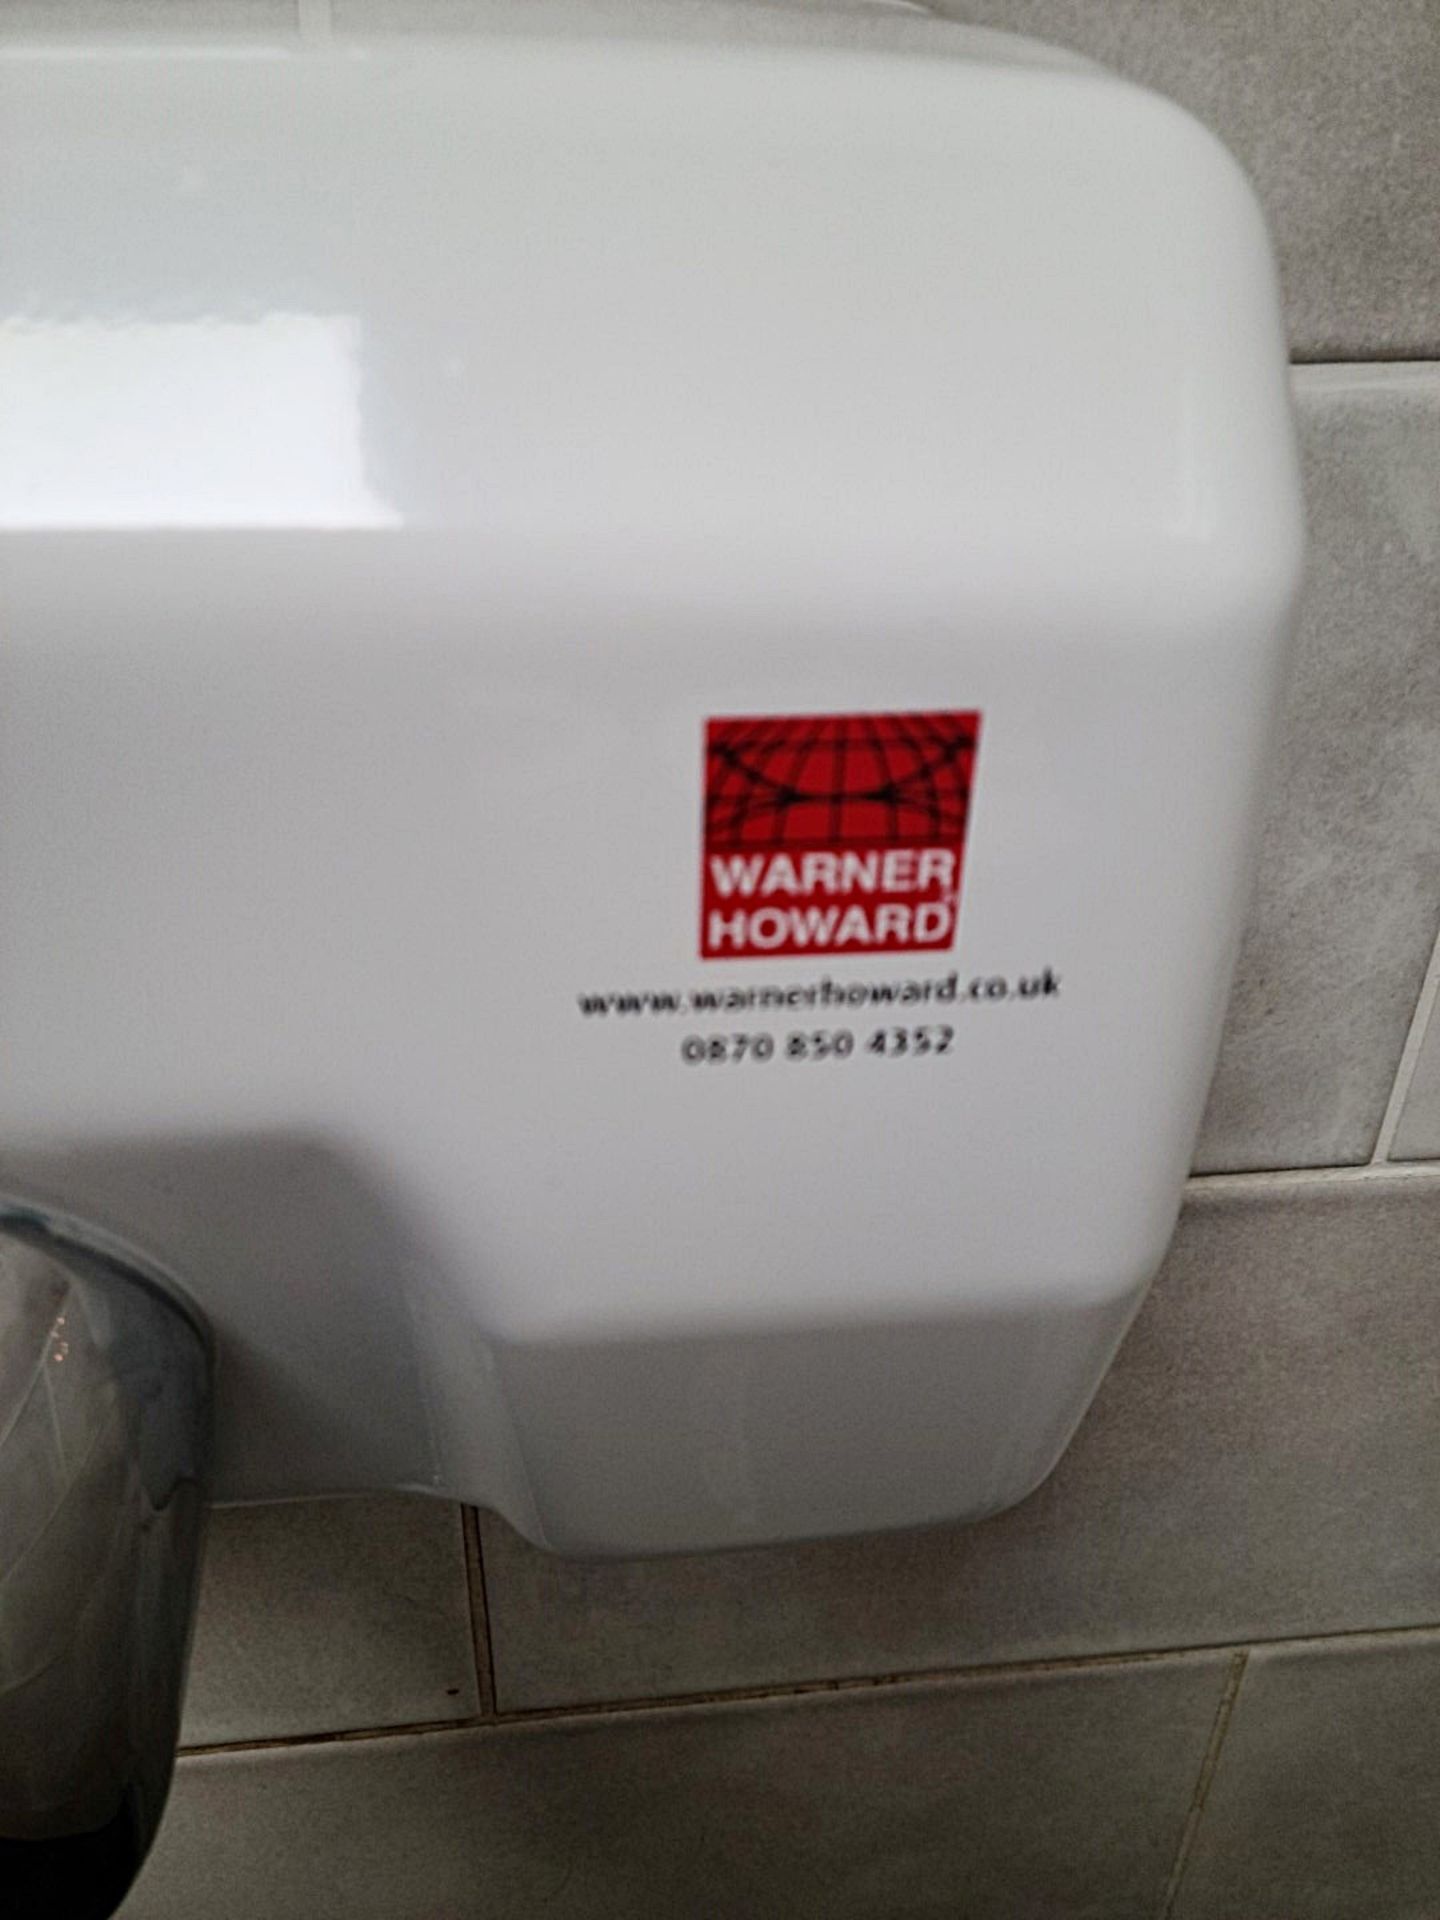 1 x WARNER HOWARD High Performance Hand Dryer 360 Degree Swivel Nozzle For Public Areas - Image 2 of 4